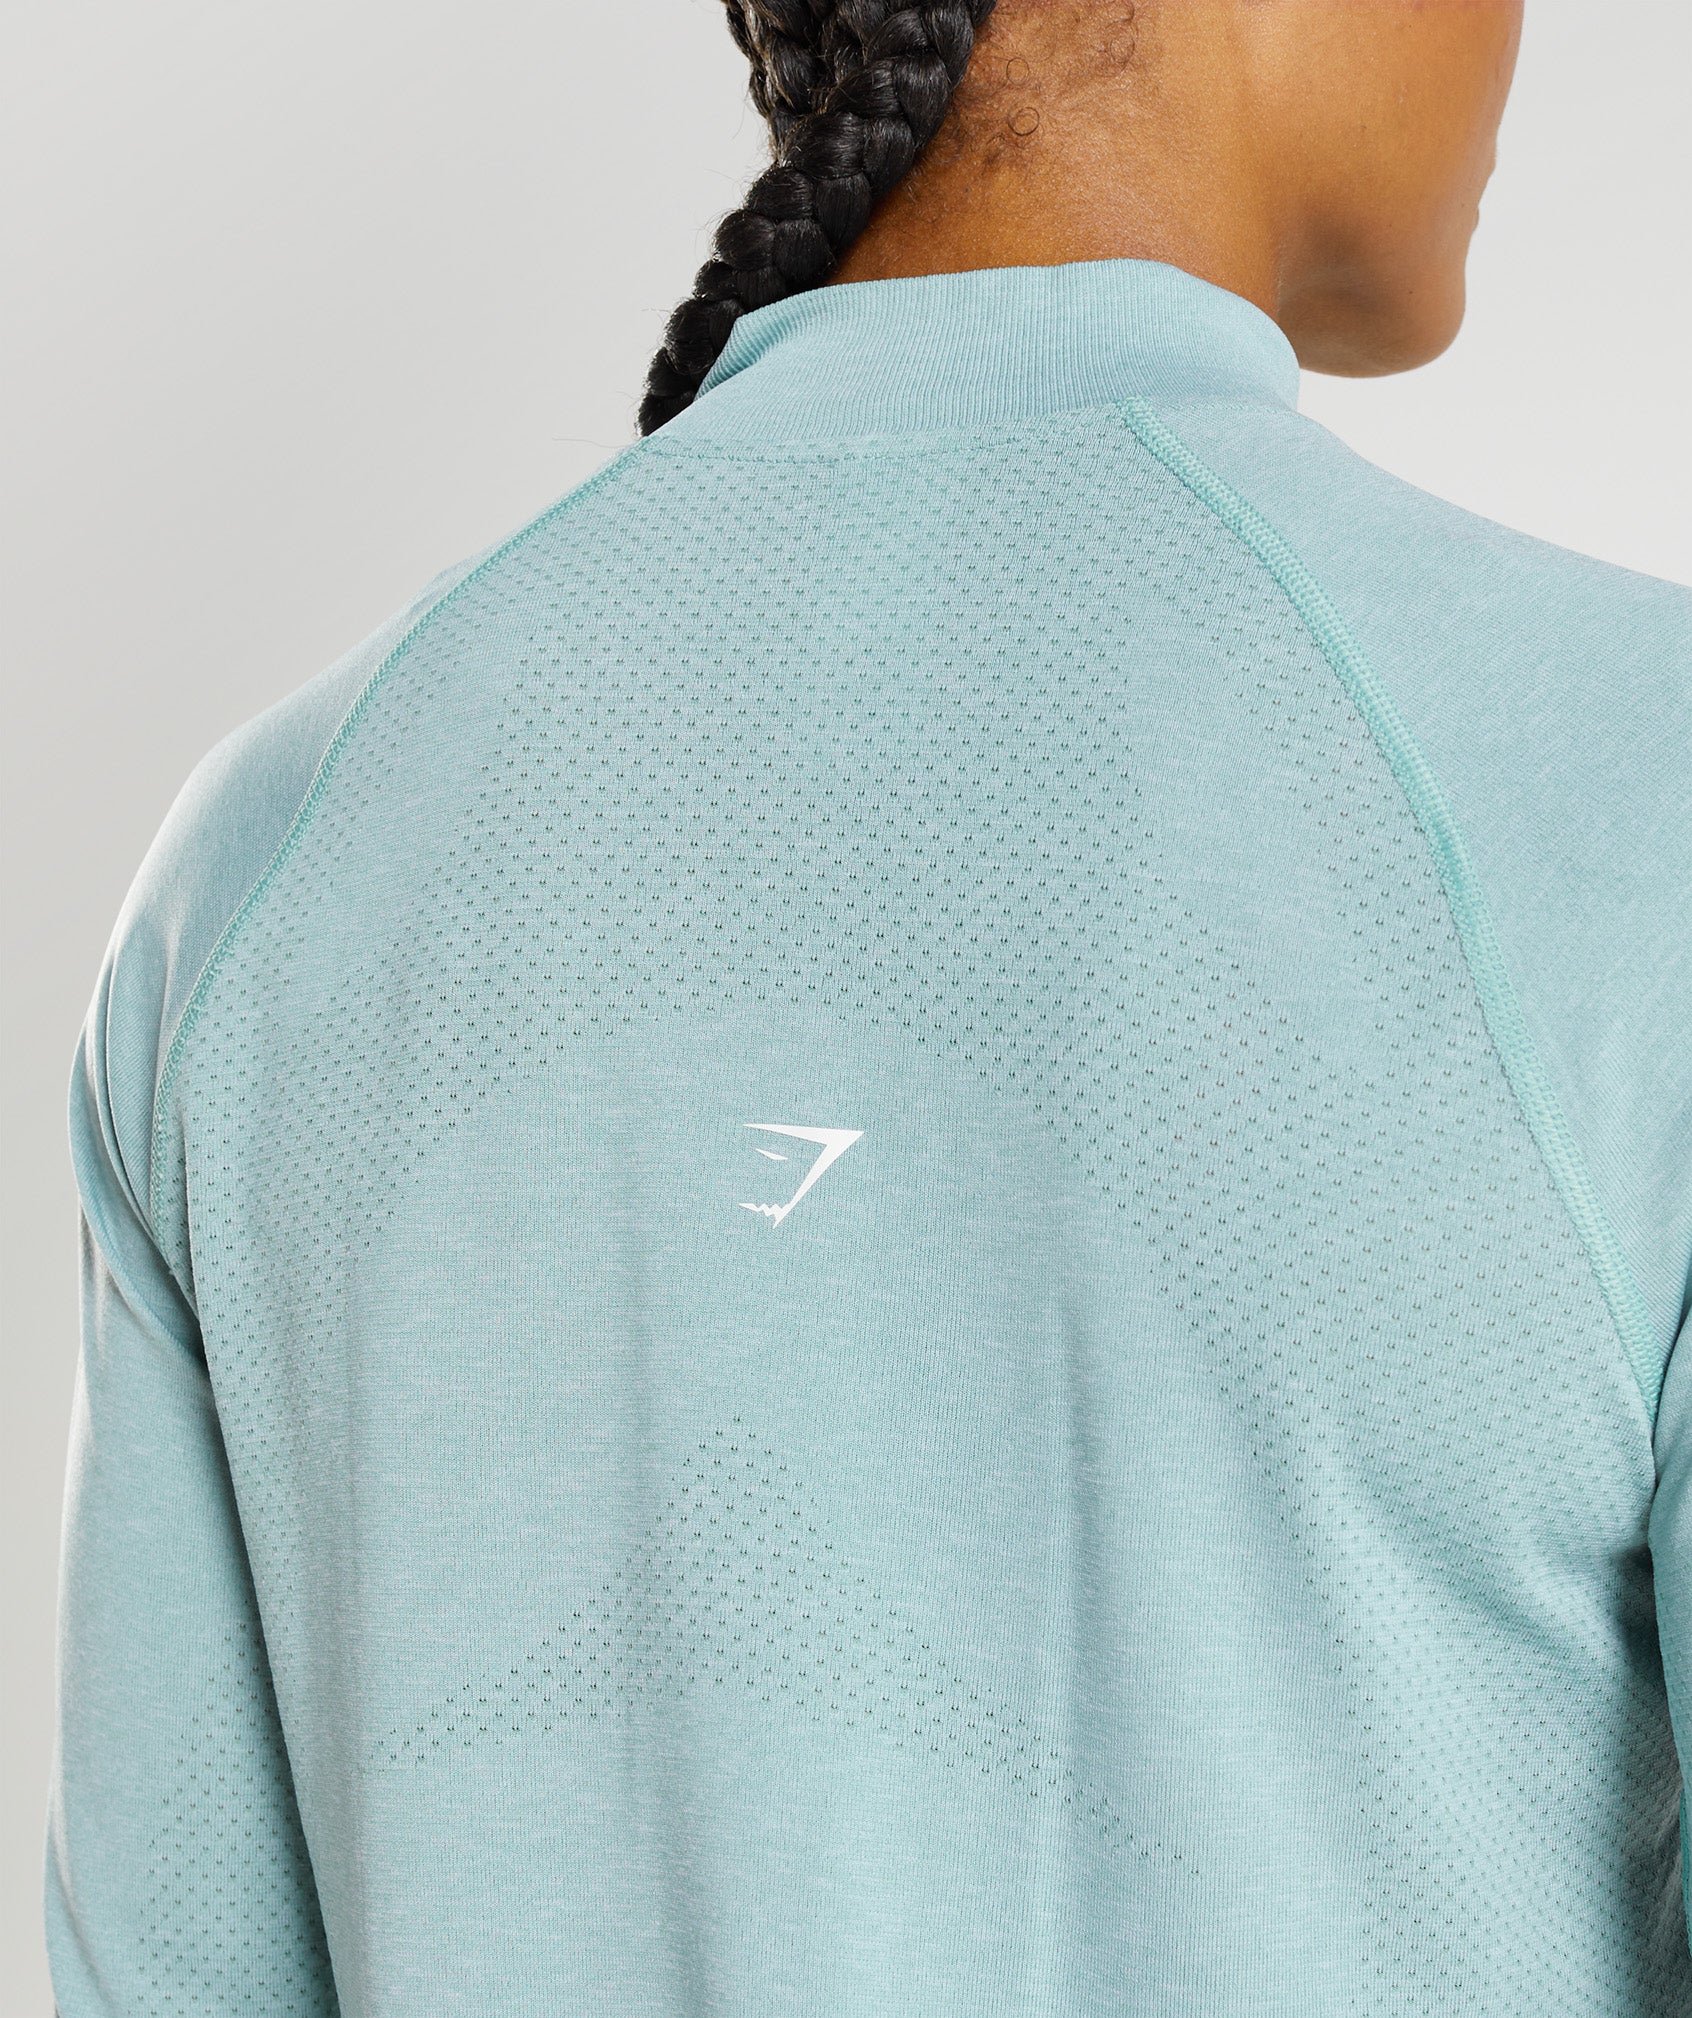 Vital Seamless 2.0 1/2 Zip Pullover in Pearl Blue Marl - view 6